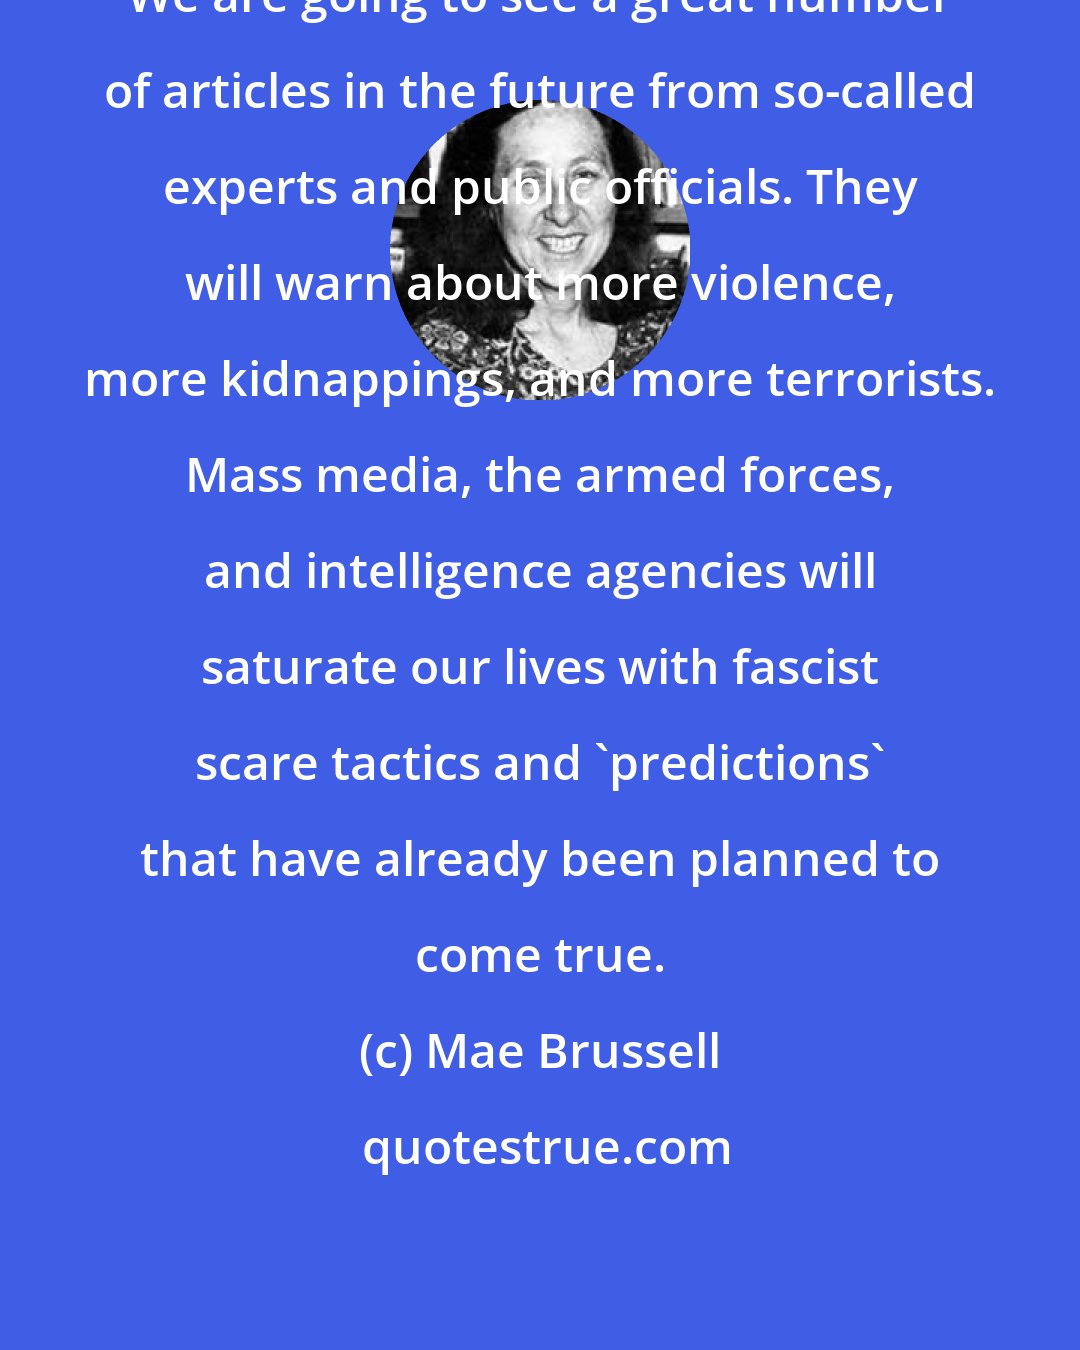 Mae Brussell: We are going to see a great number of articles in the future from so-called experts and public officials. They will warn about more violence, more kidnappings, and more terrorists. Mass media, the armed forces, and intelligence agencies will saturate our lives with fascist scare tactics and 'predictions' that have already been planned to come true.